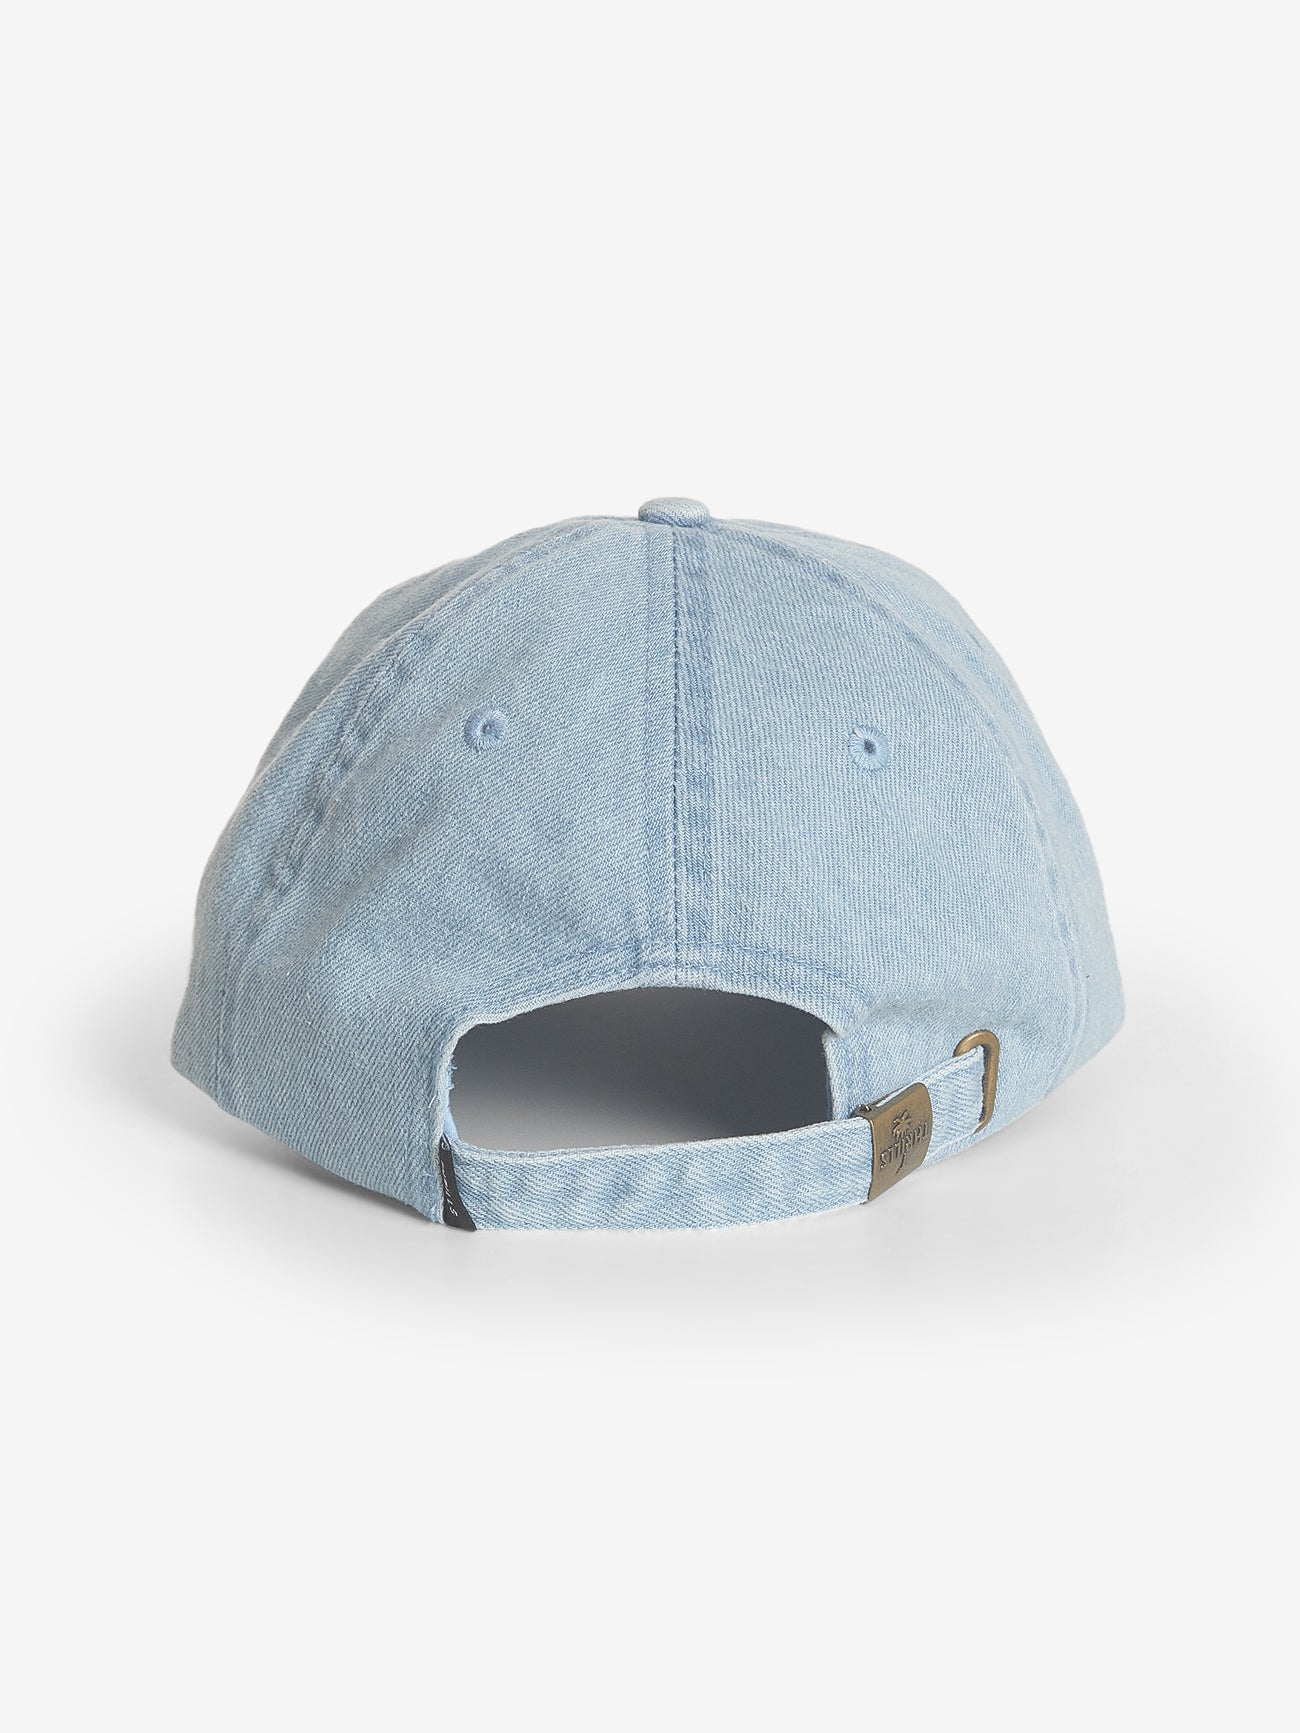 Full Court Press Hat - Endless Blue One Size